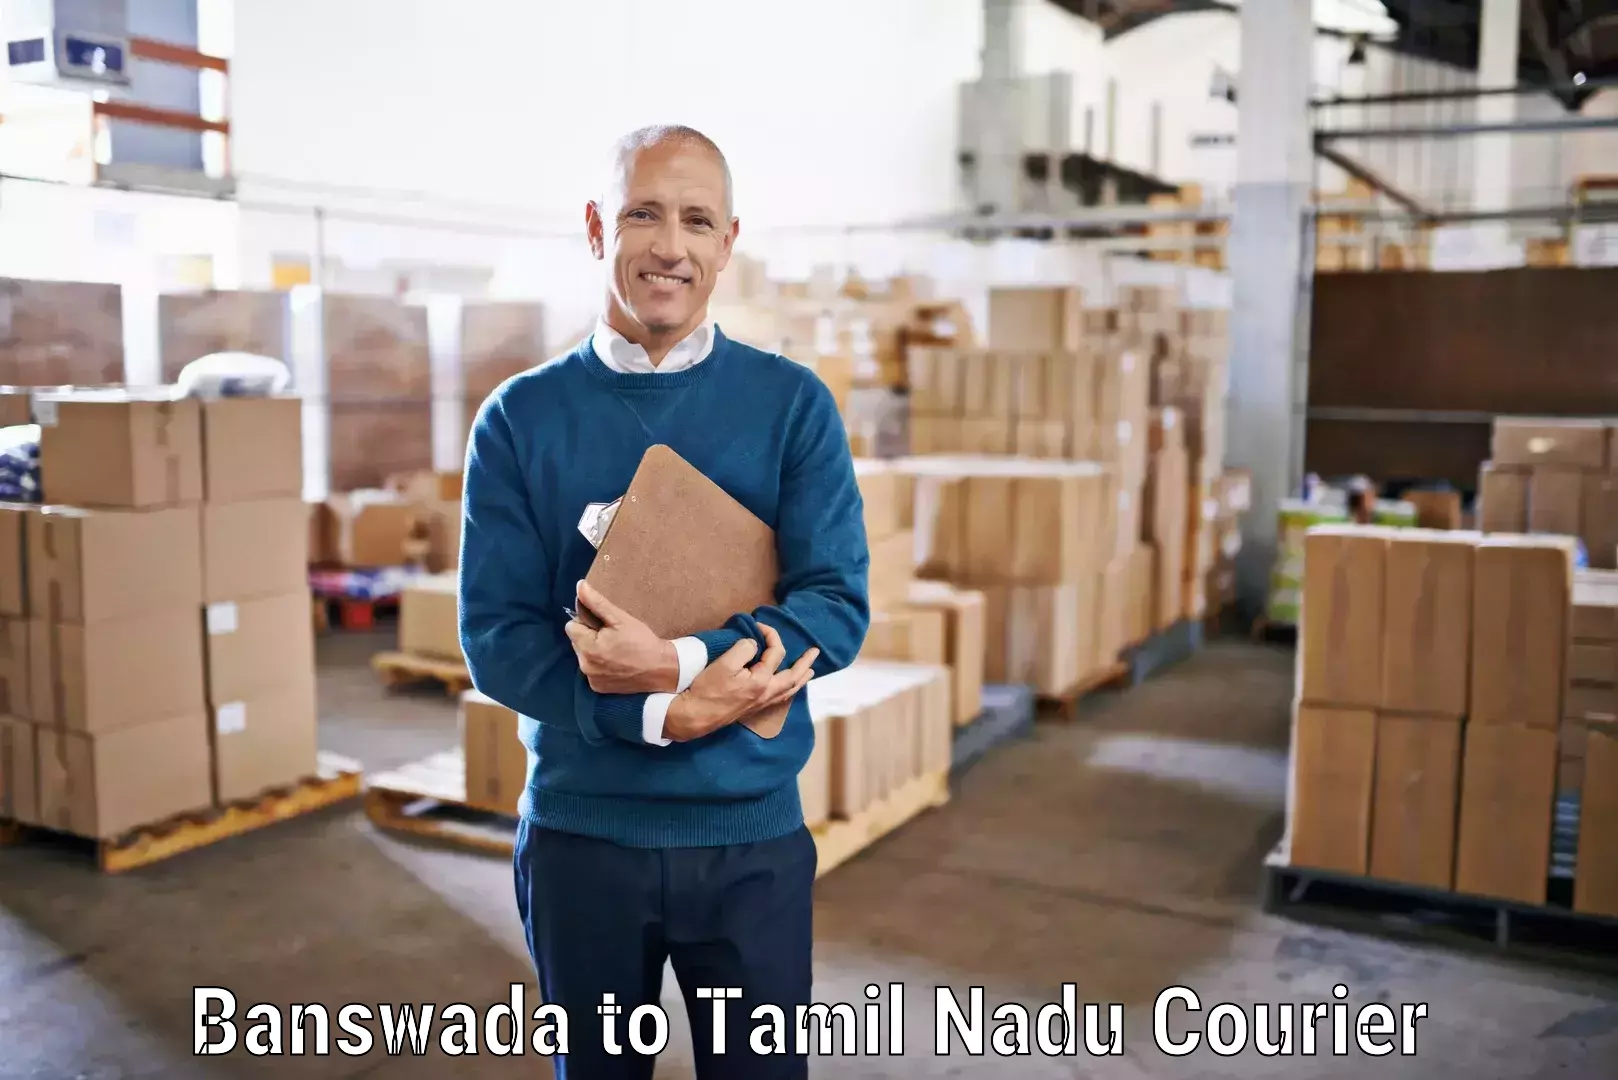 Tailored shipping services in Banswada to Melmaruvathur